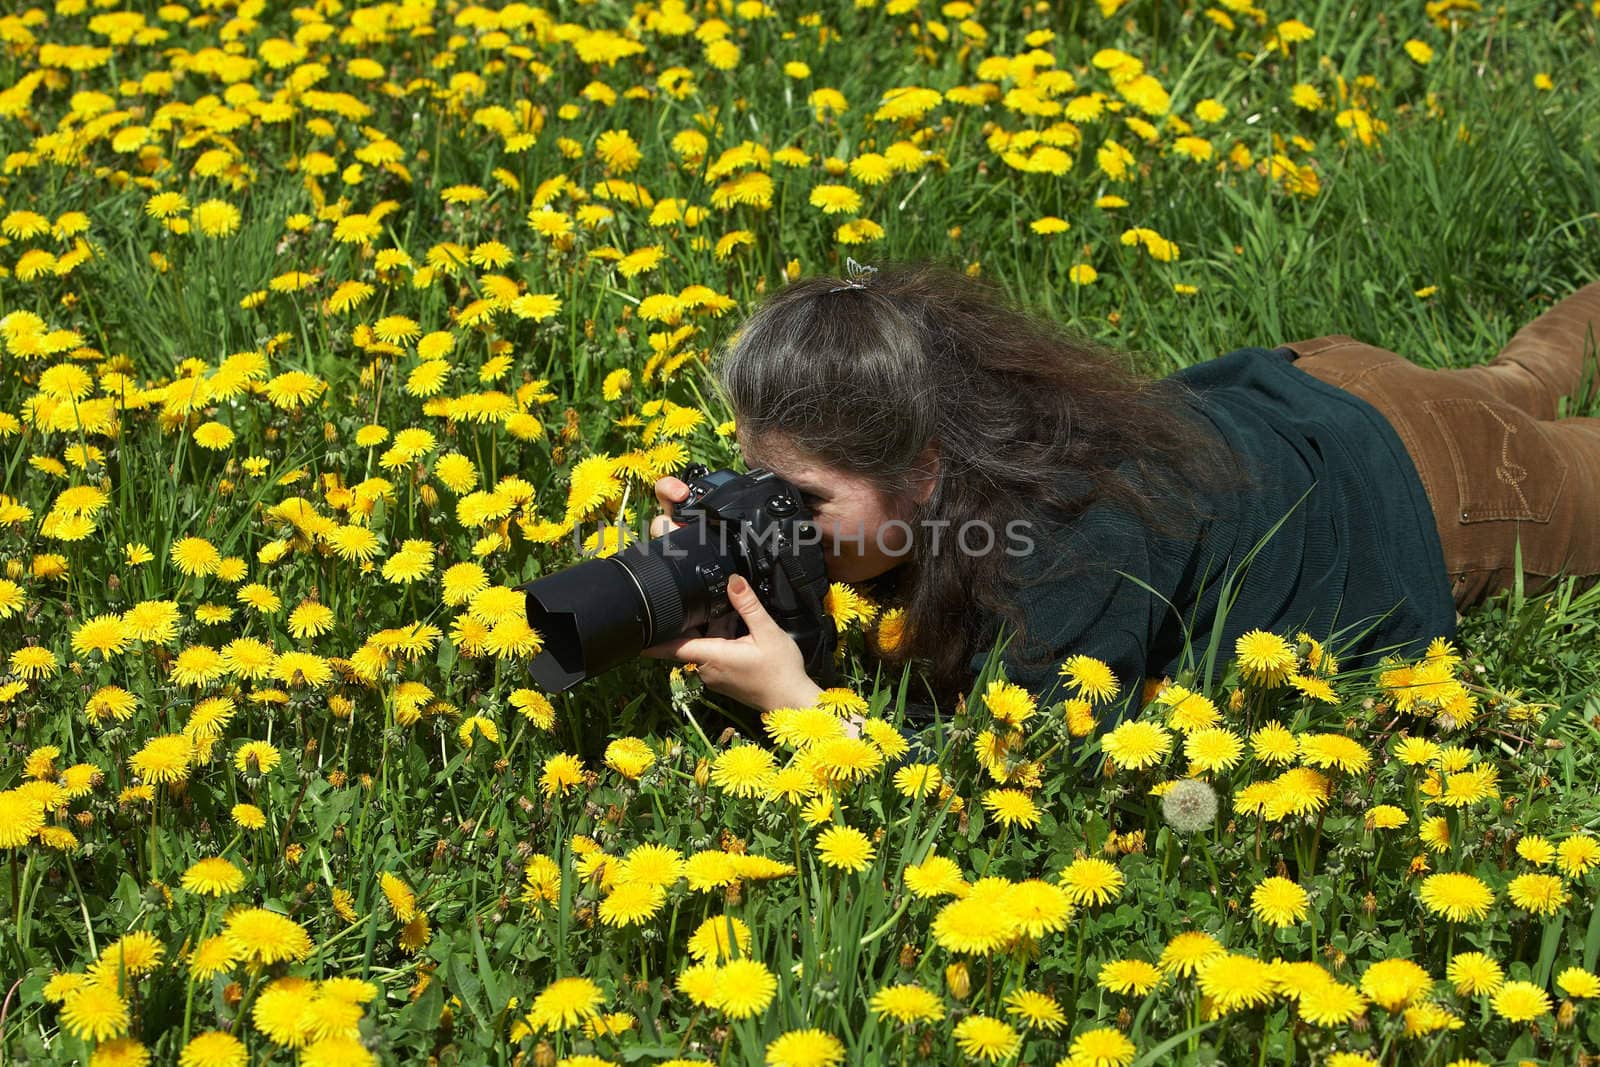 The photographer removing blossoming dandelions in the field. A macroshooting lesson.